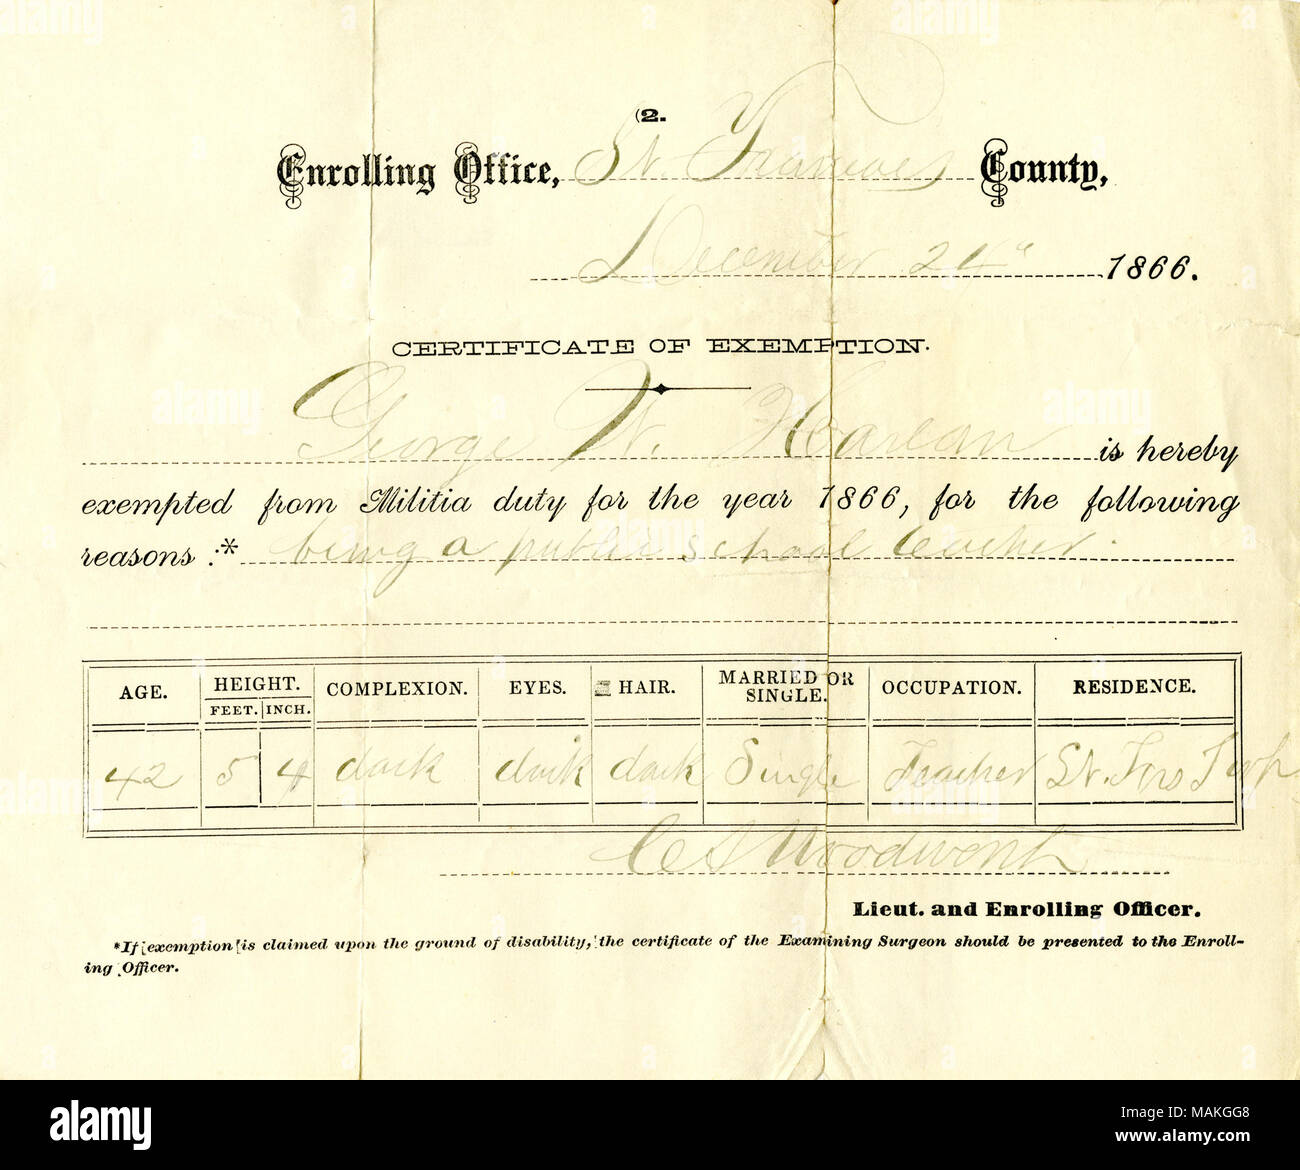 Title: Certificate of exemption of George W. Harlan, Enrolling Office, St. Francois County, December 24, 1866  . 24 December 1866. Stock Photo